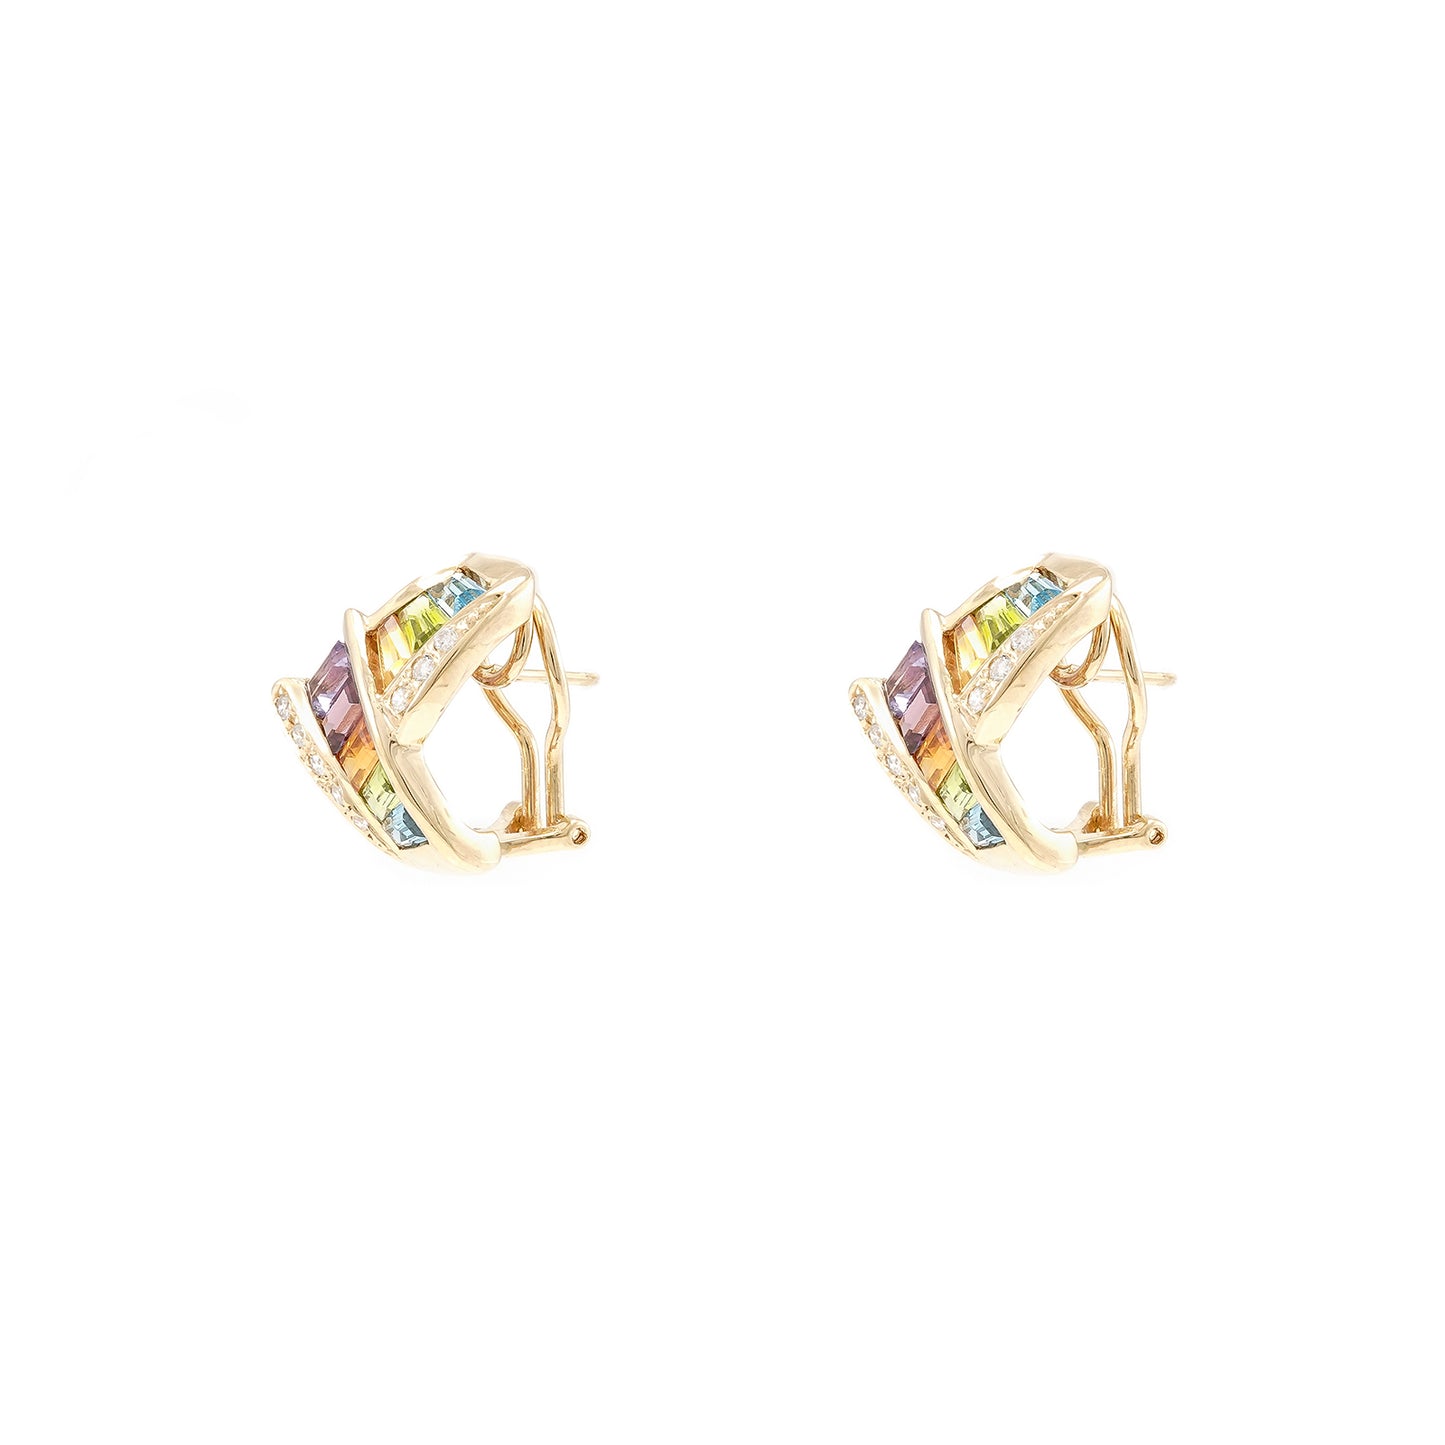 Modern women's clip-on earrings with diamonds and colorful gemstones 14K yellow gold